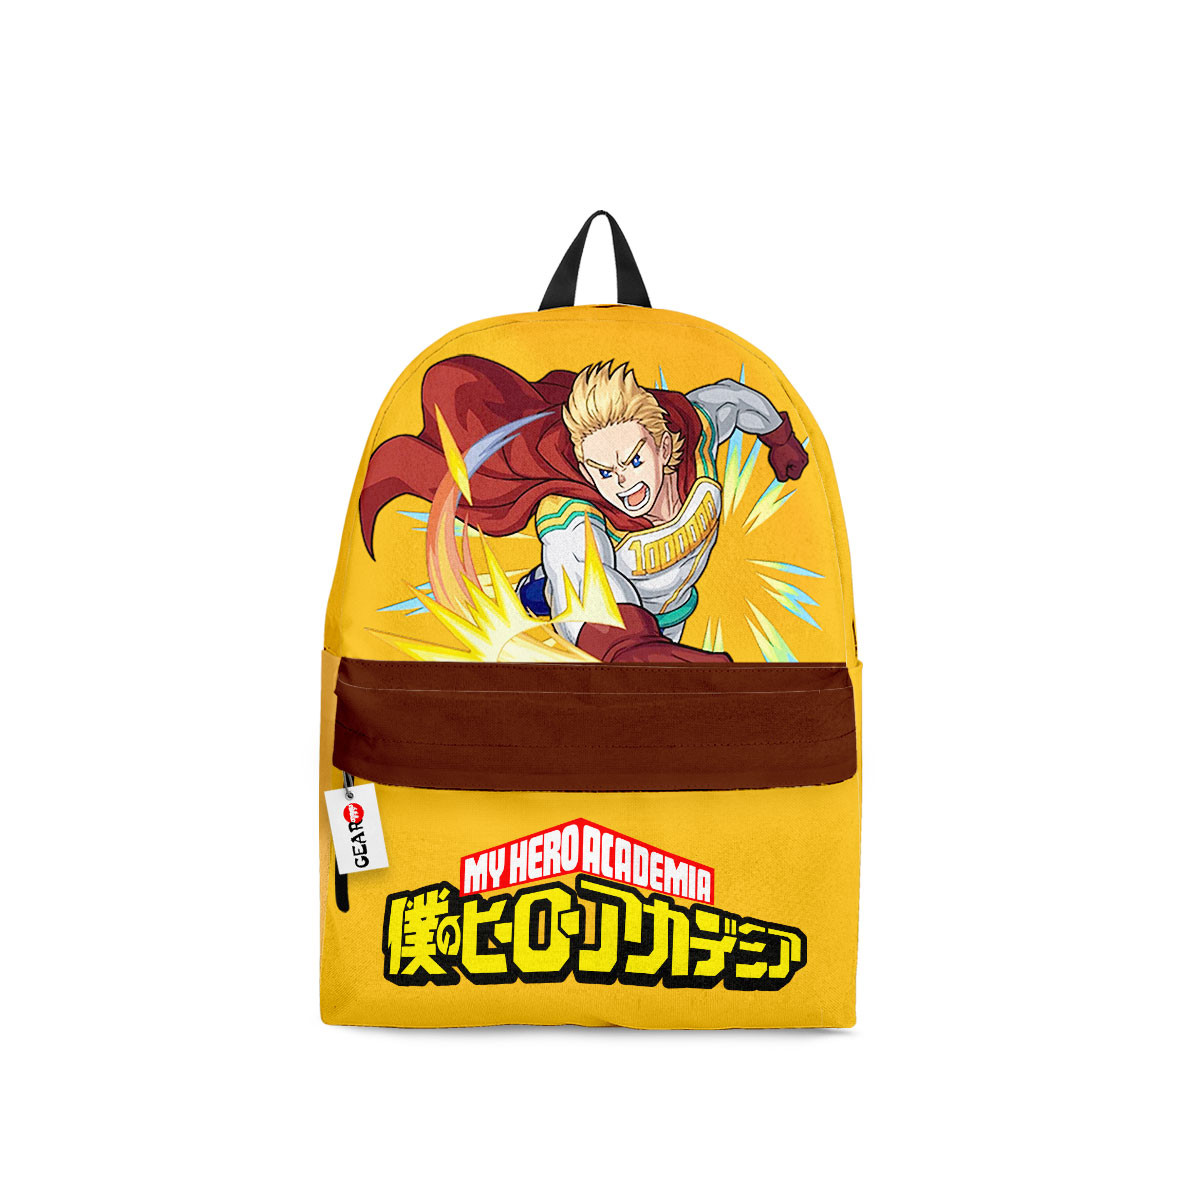 Latest Anime style products 103